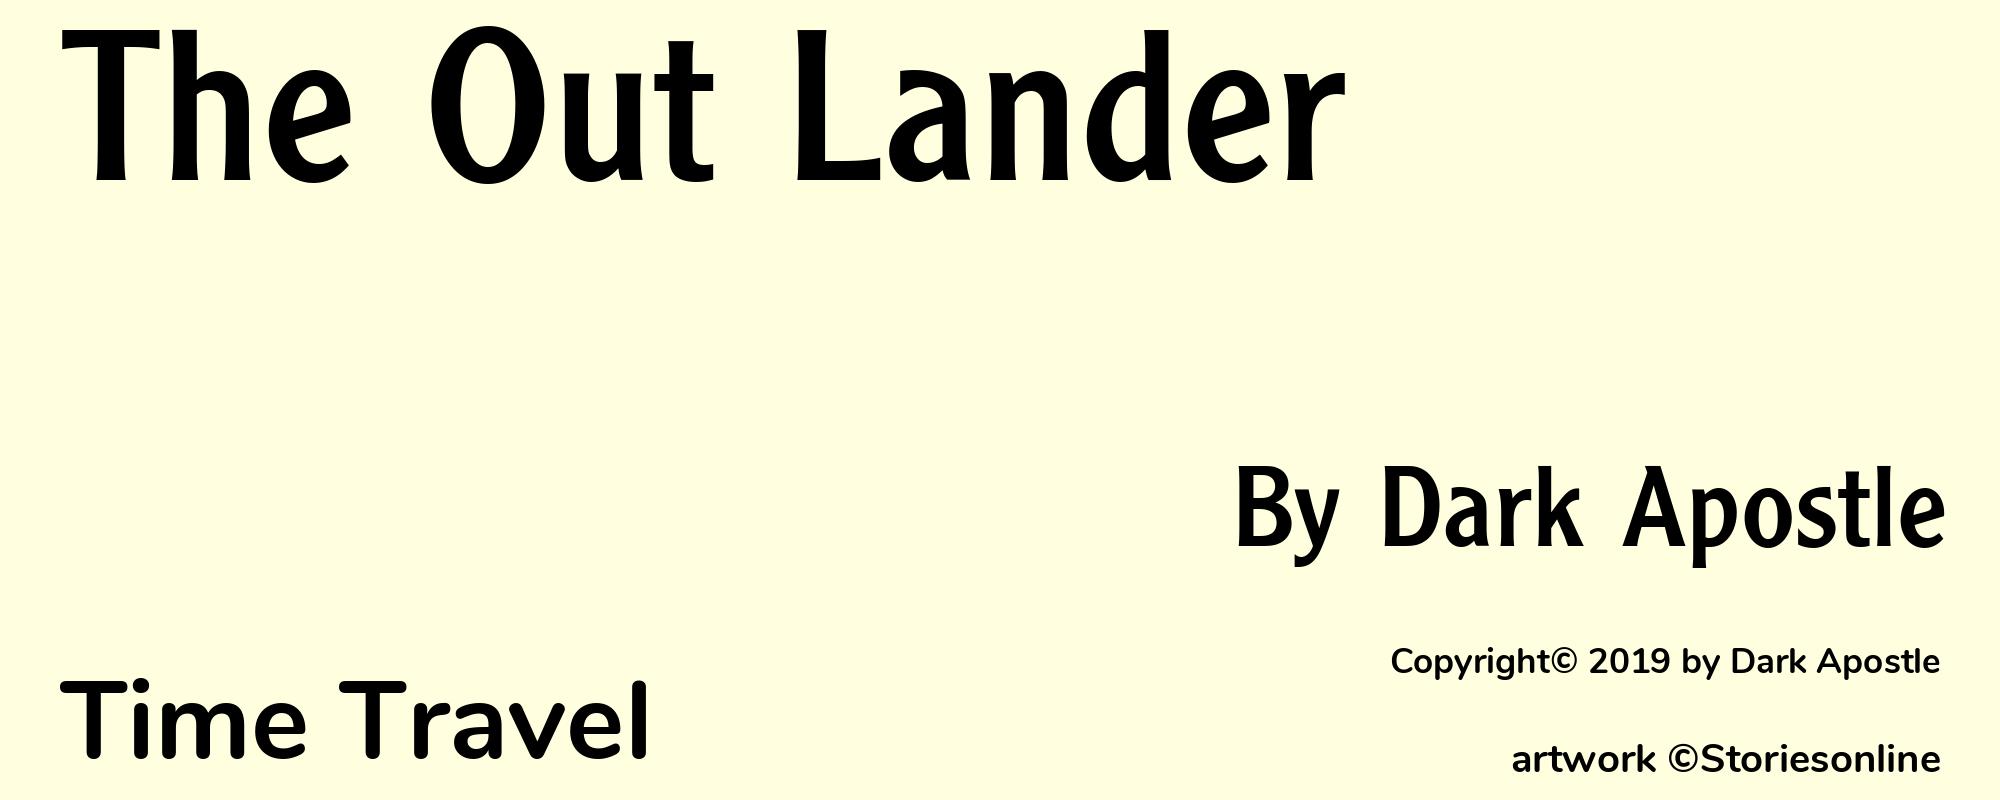 The Out Lander - Cover